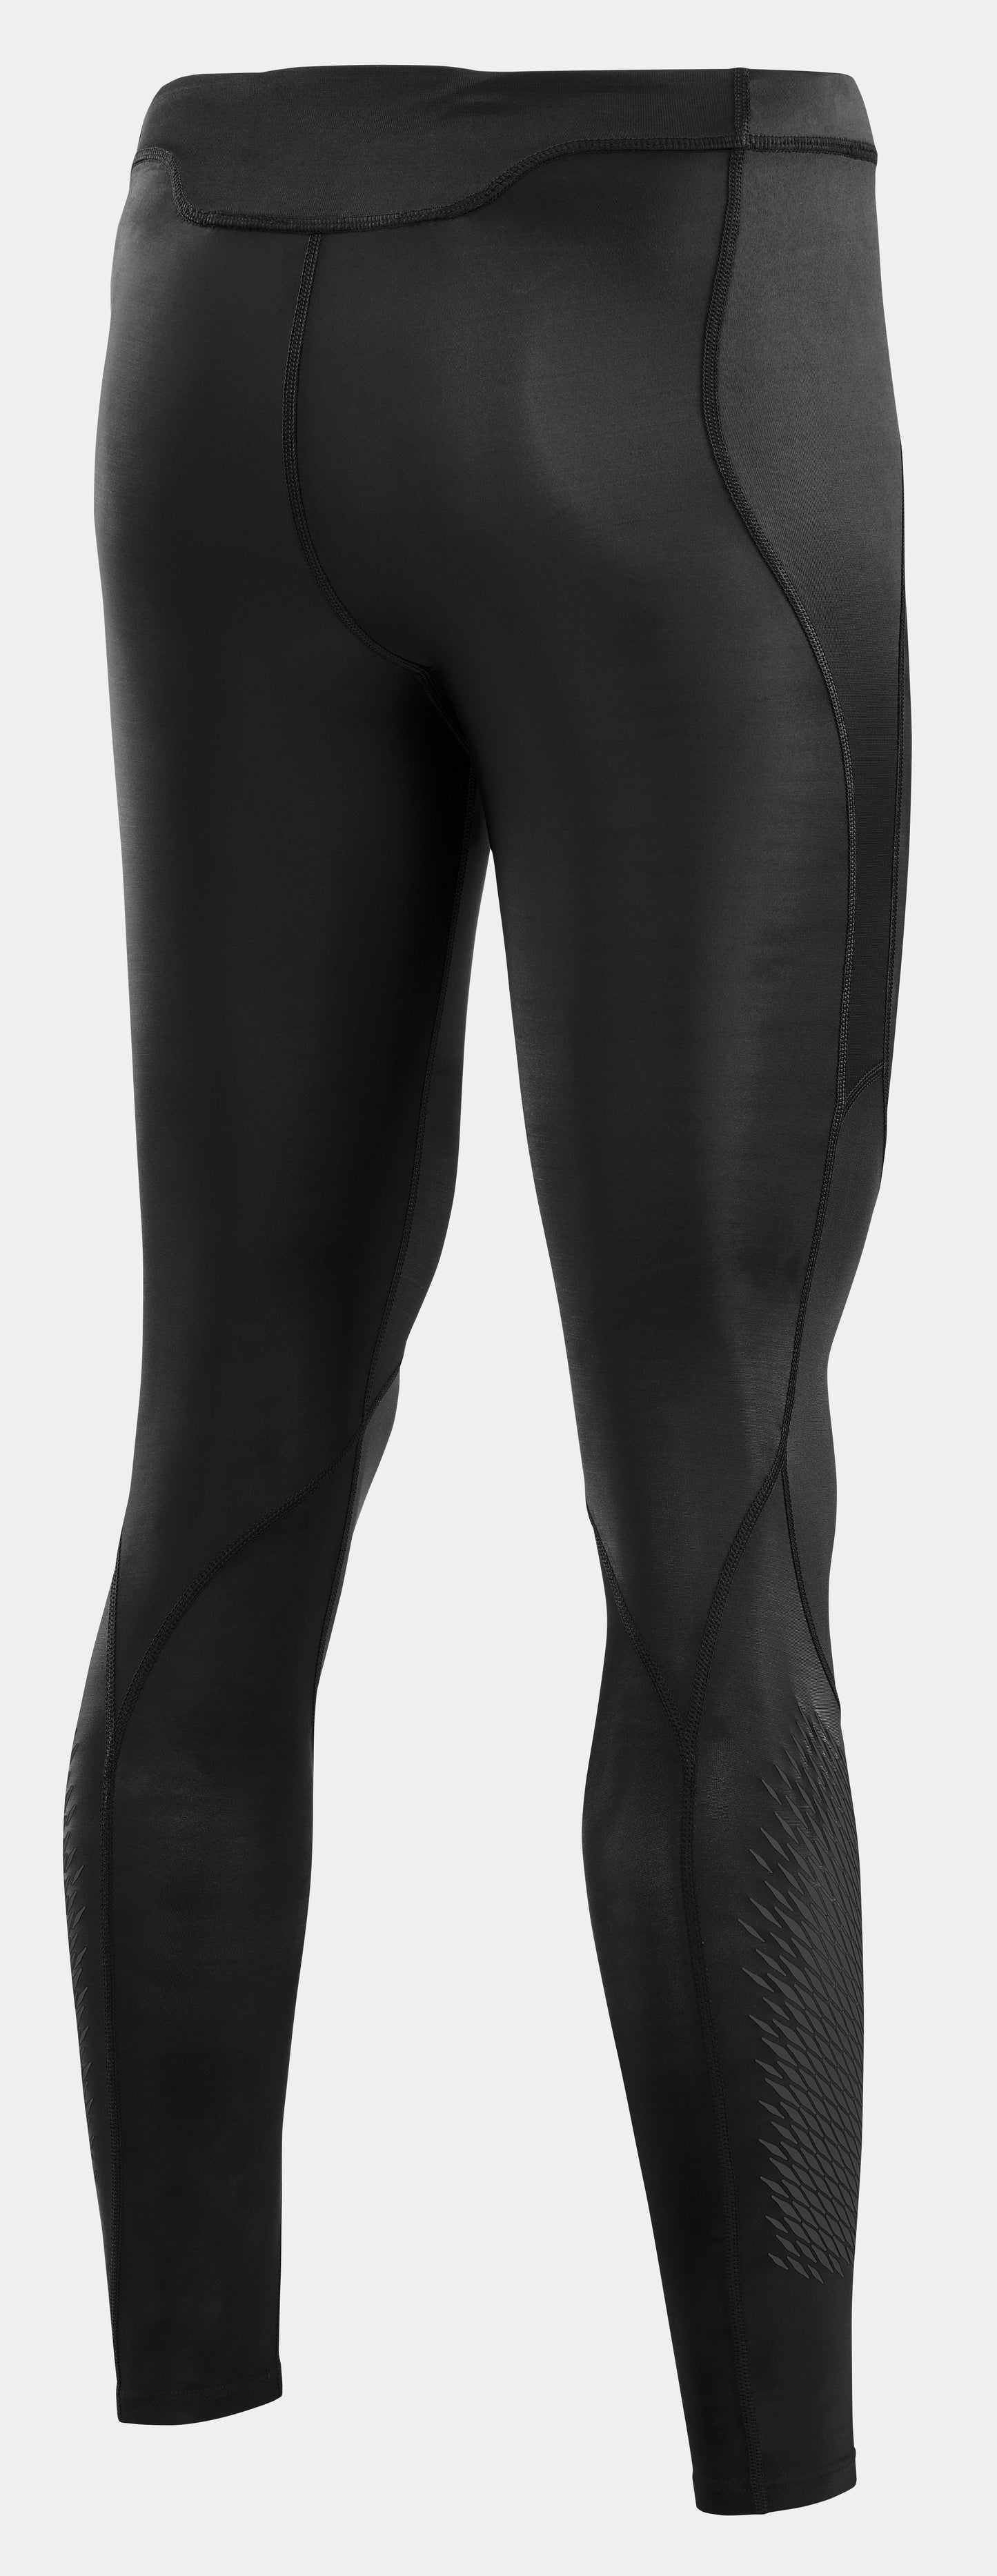 SKINS Women's Compression 400 Long Tights 3-Series - Black/Stras